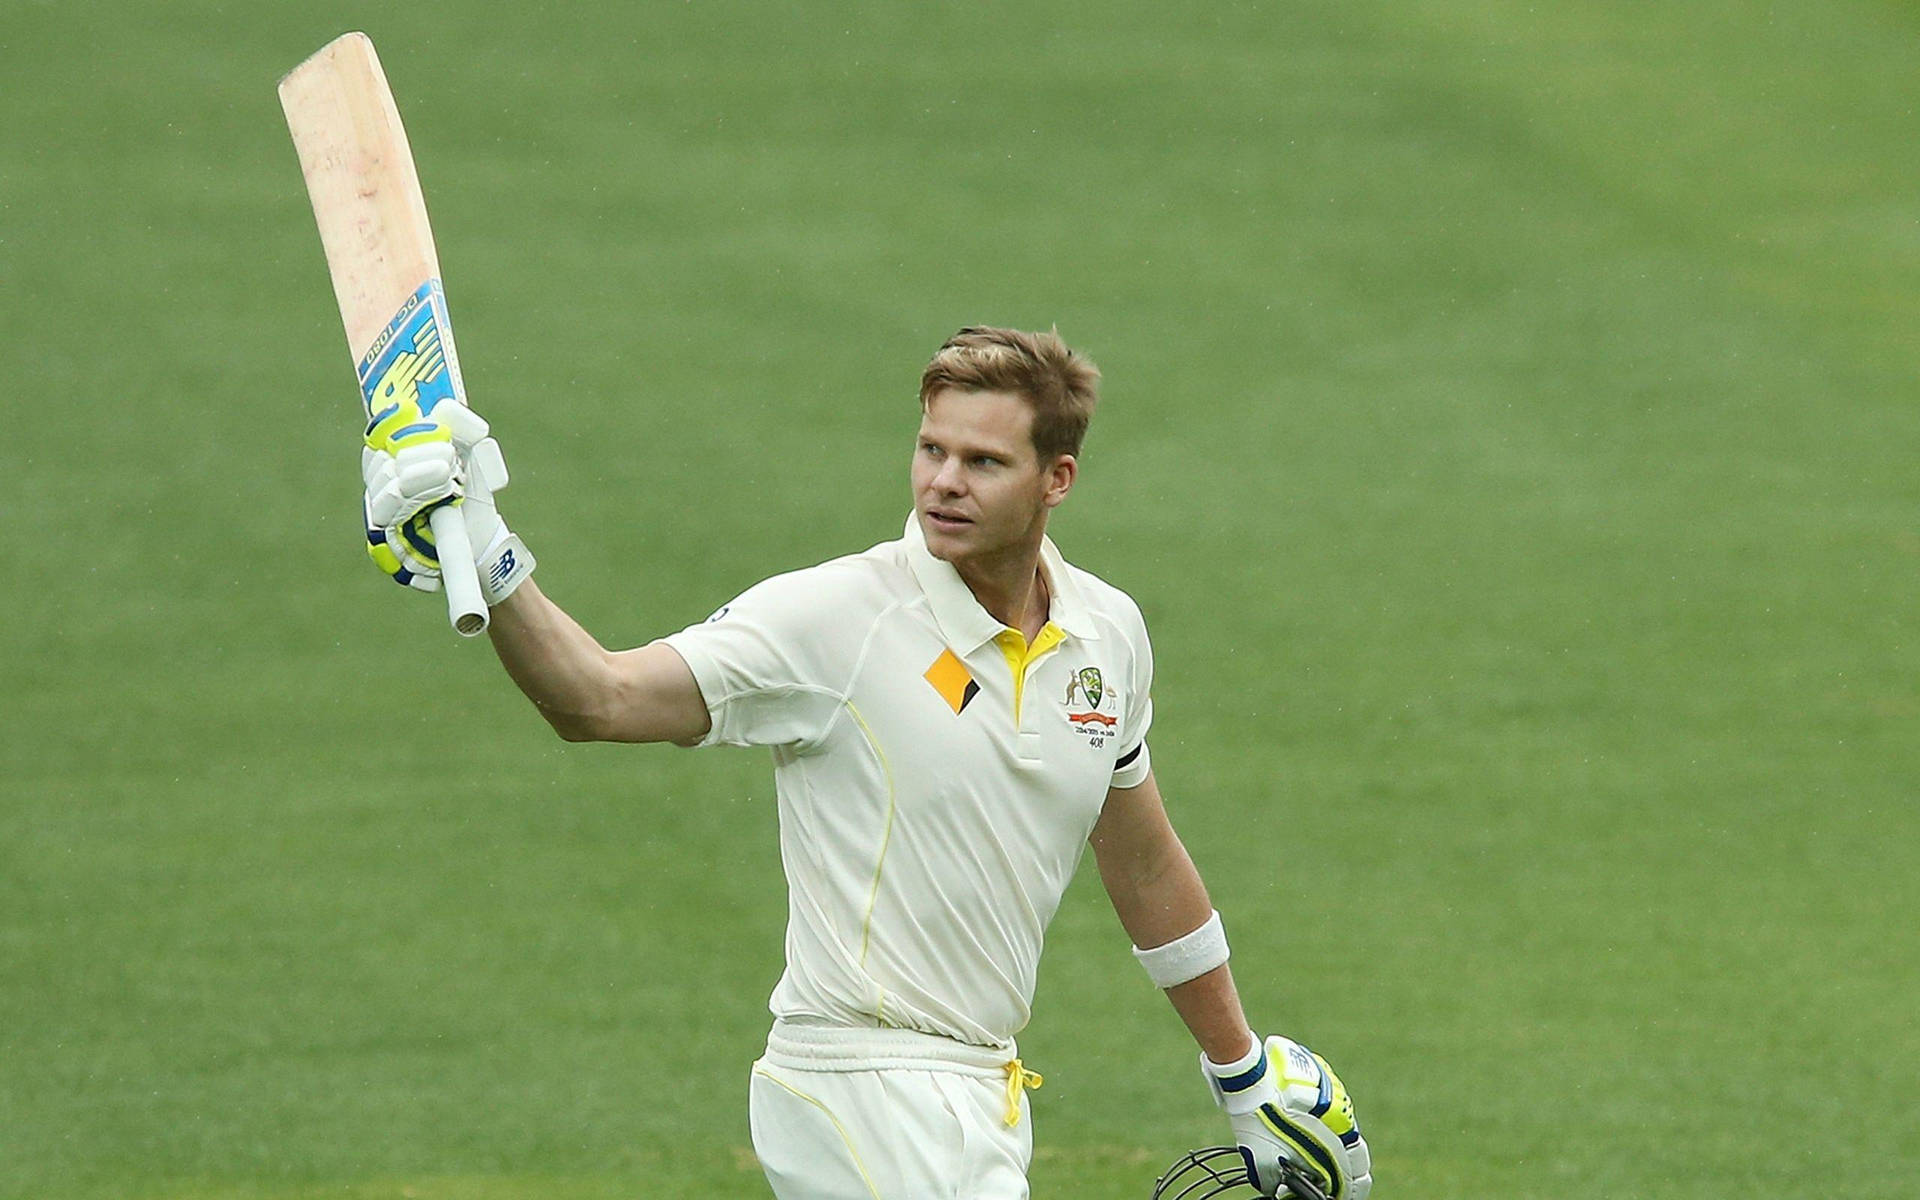 Steve Smith At Adelaide Oval Background